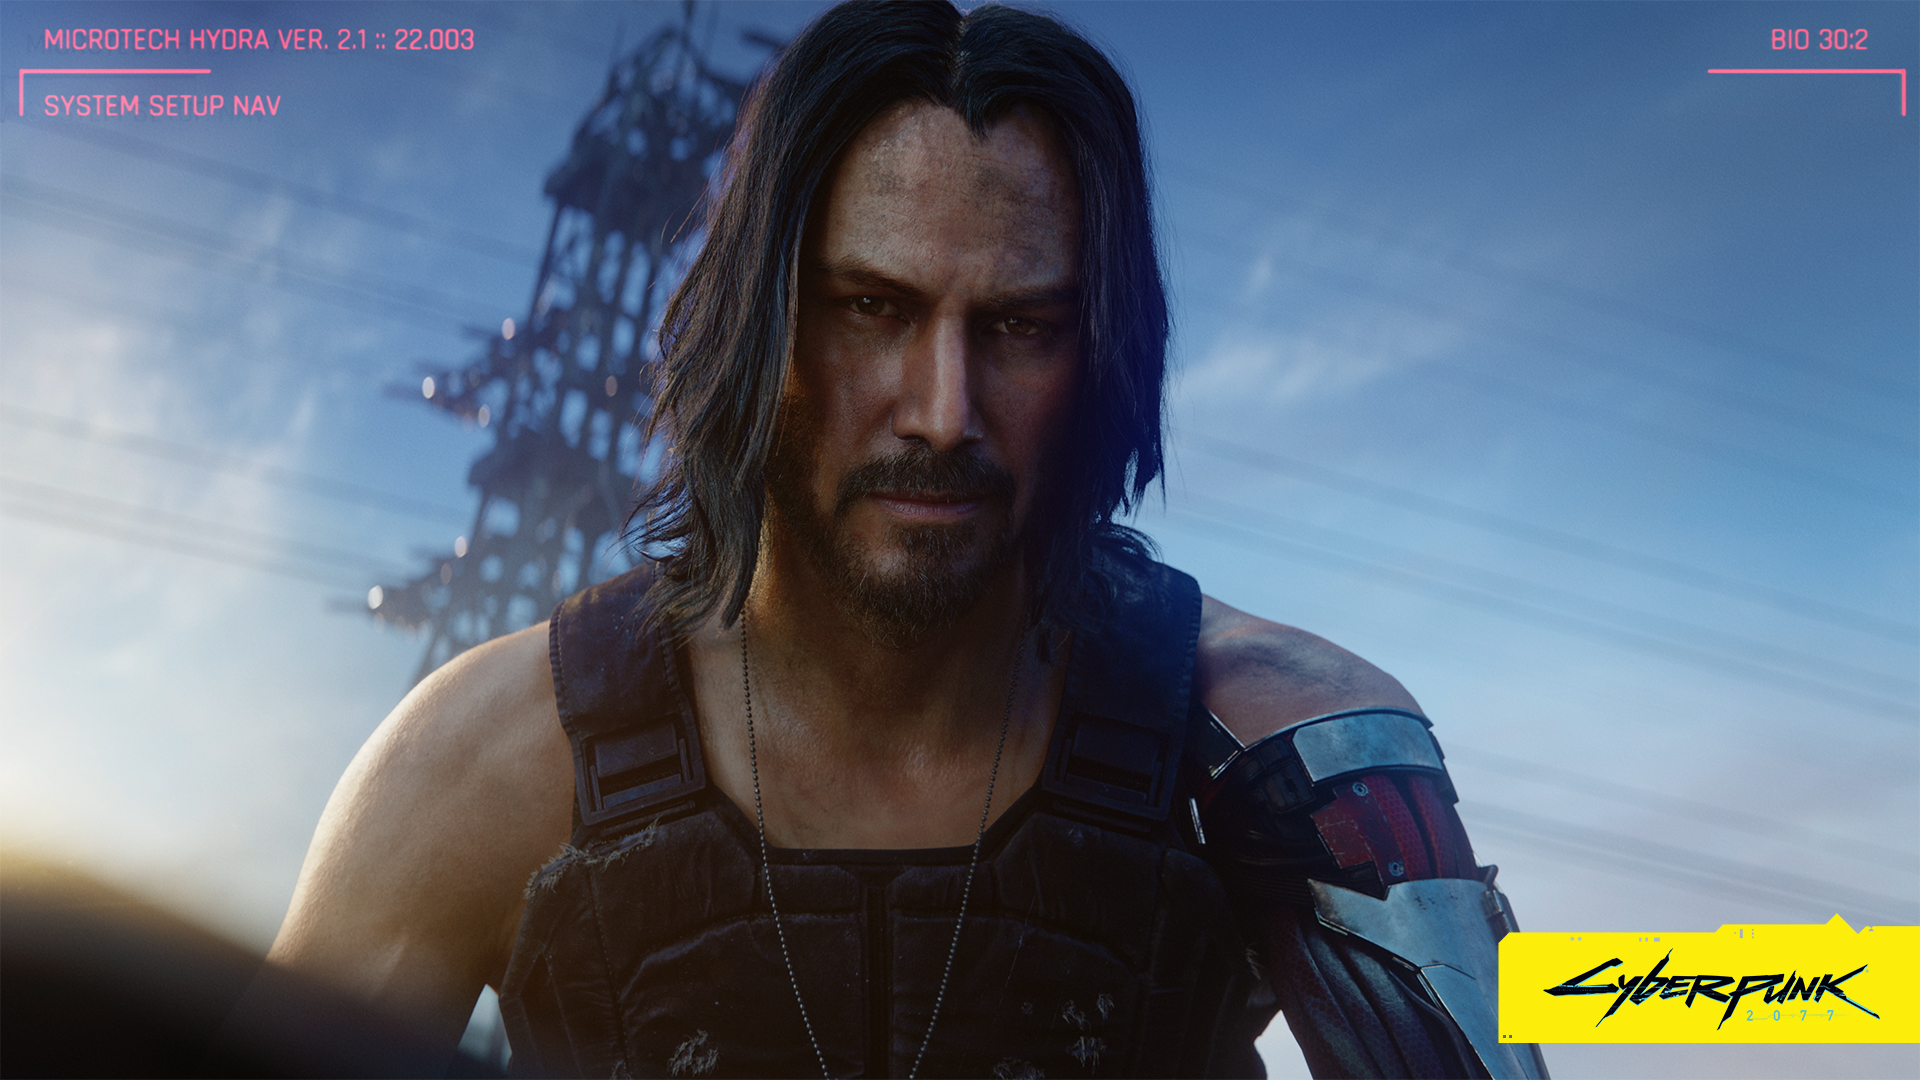 General 1920x1080 Cyberpunk 2077 video games Keanu Reeves CD Projekt RED Johnny Silverhand video game men video game characters PC gaming